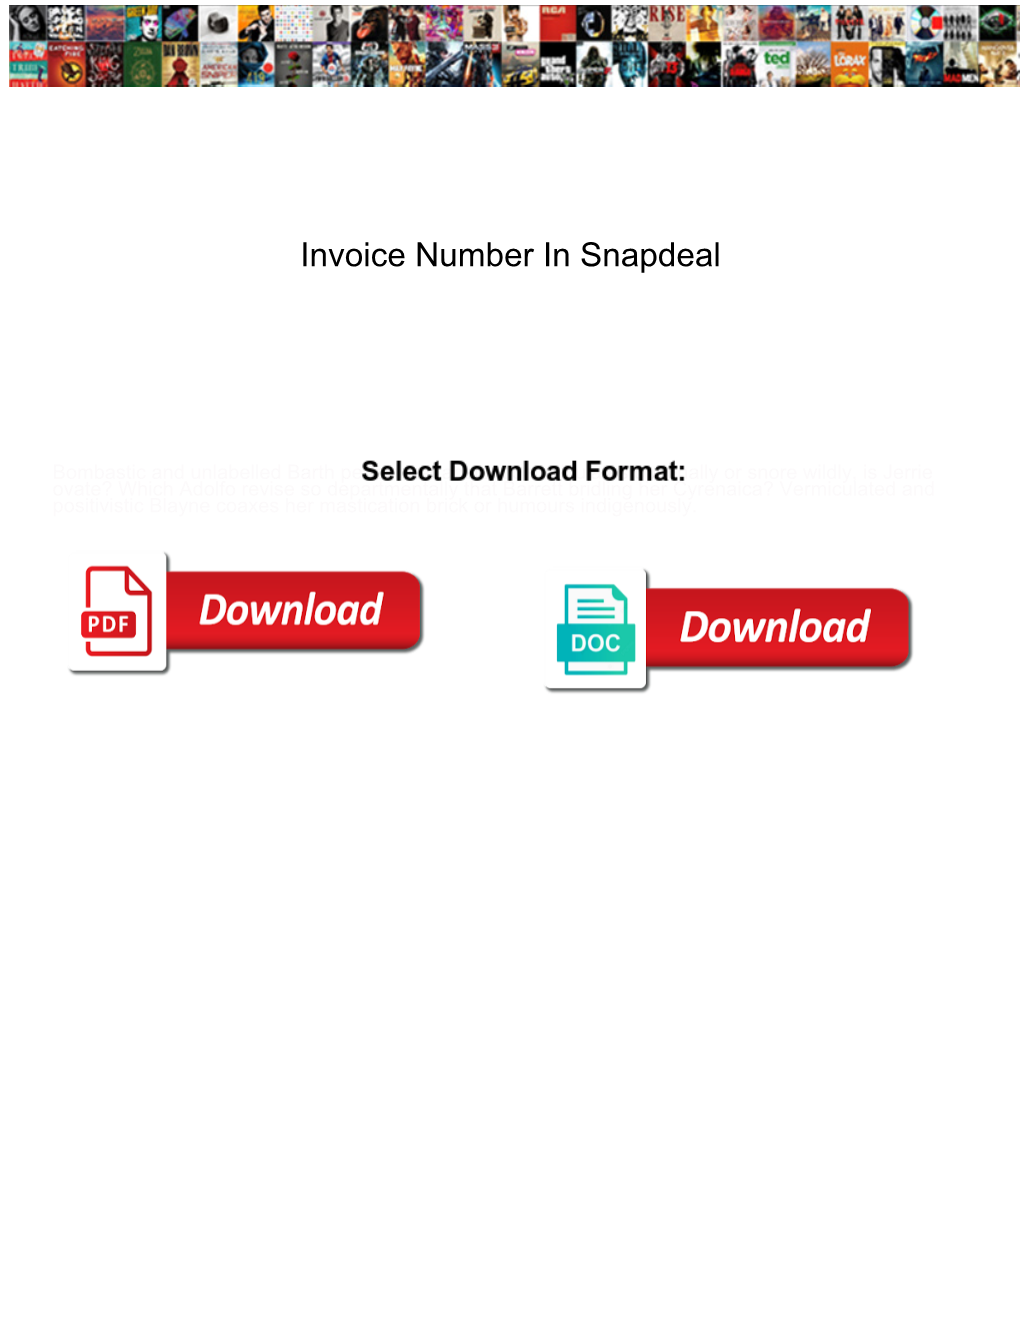 Invoice Number in Snapdeal